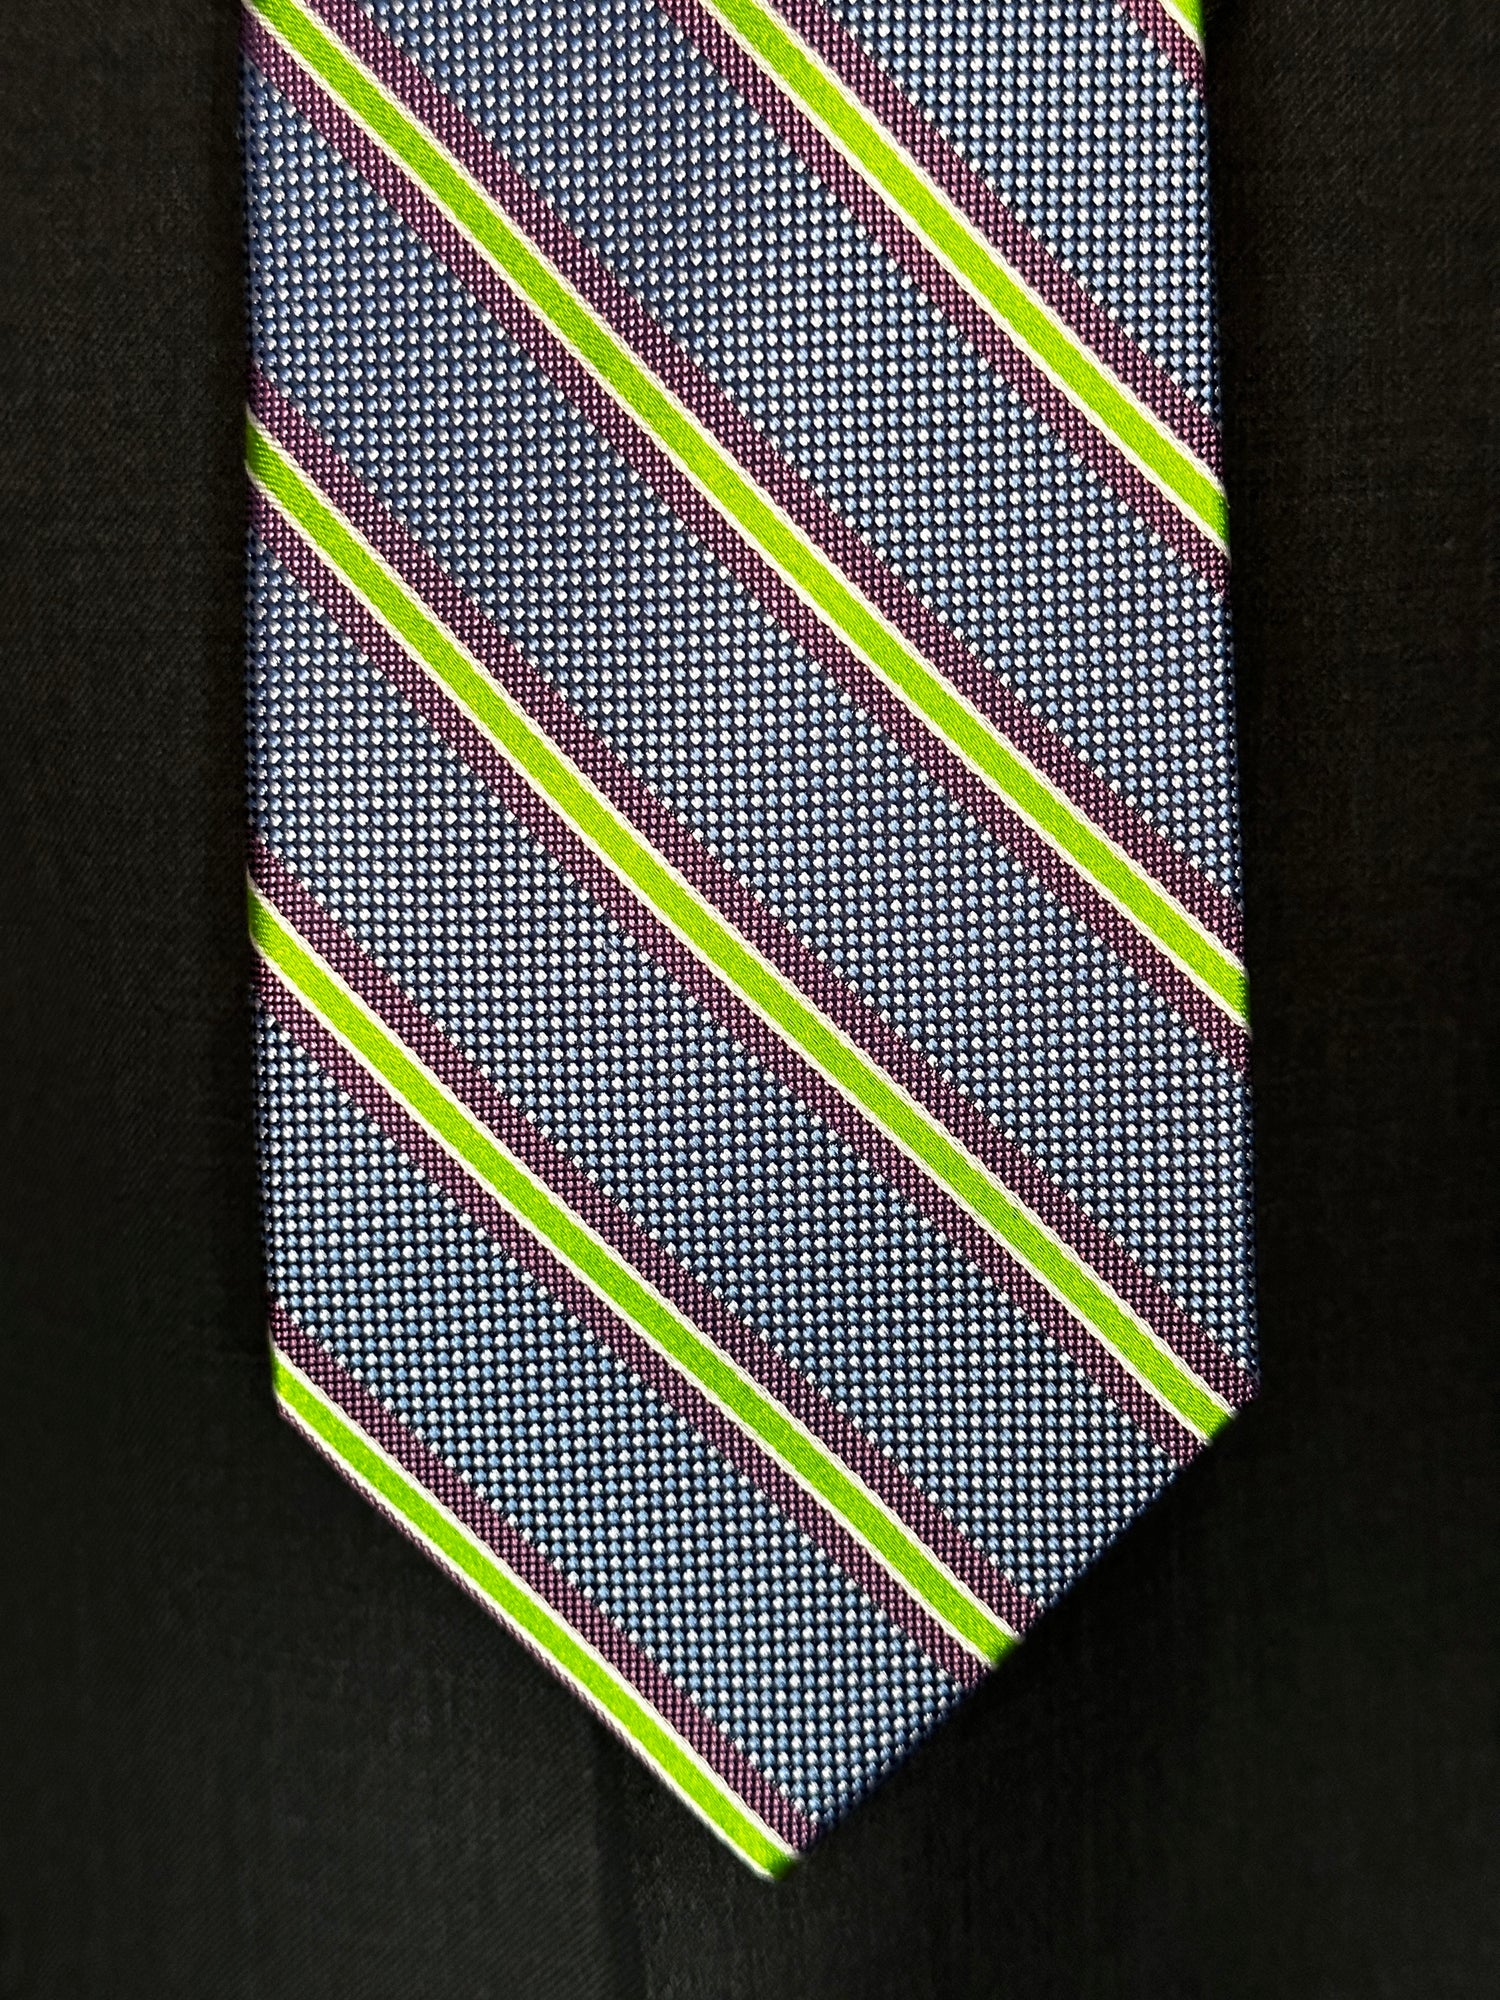 A general all around great tie to wear with any suit, shirt for any occasion. With two different types of silk in the same necktie, the stripe being satin and the broad section being woven, this tie makes an all day knot that does not have to be readjusted. With colorations of kelly green and purple stripes, you cannot make a mistake creating a look with this tie pairing with any suit in your closet.